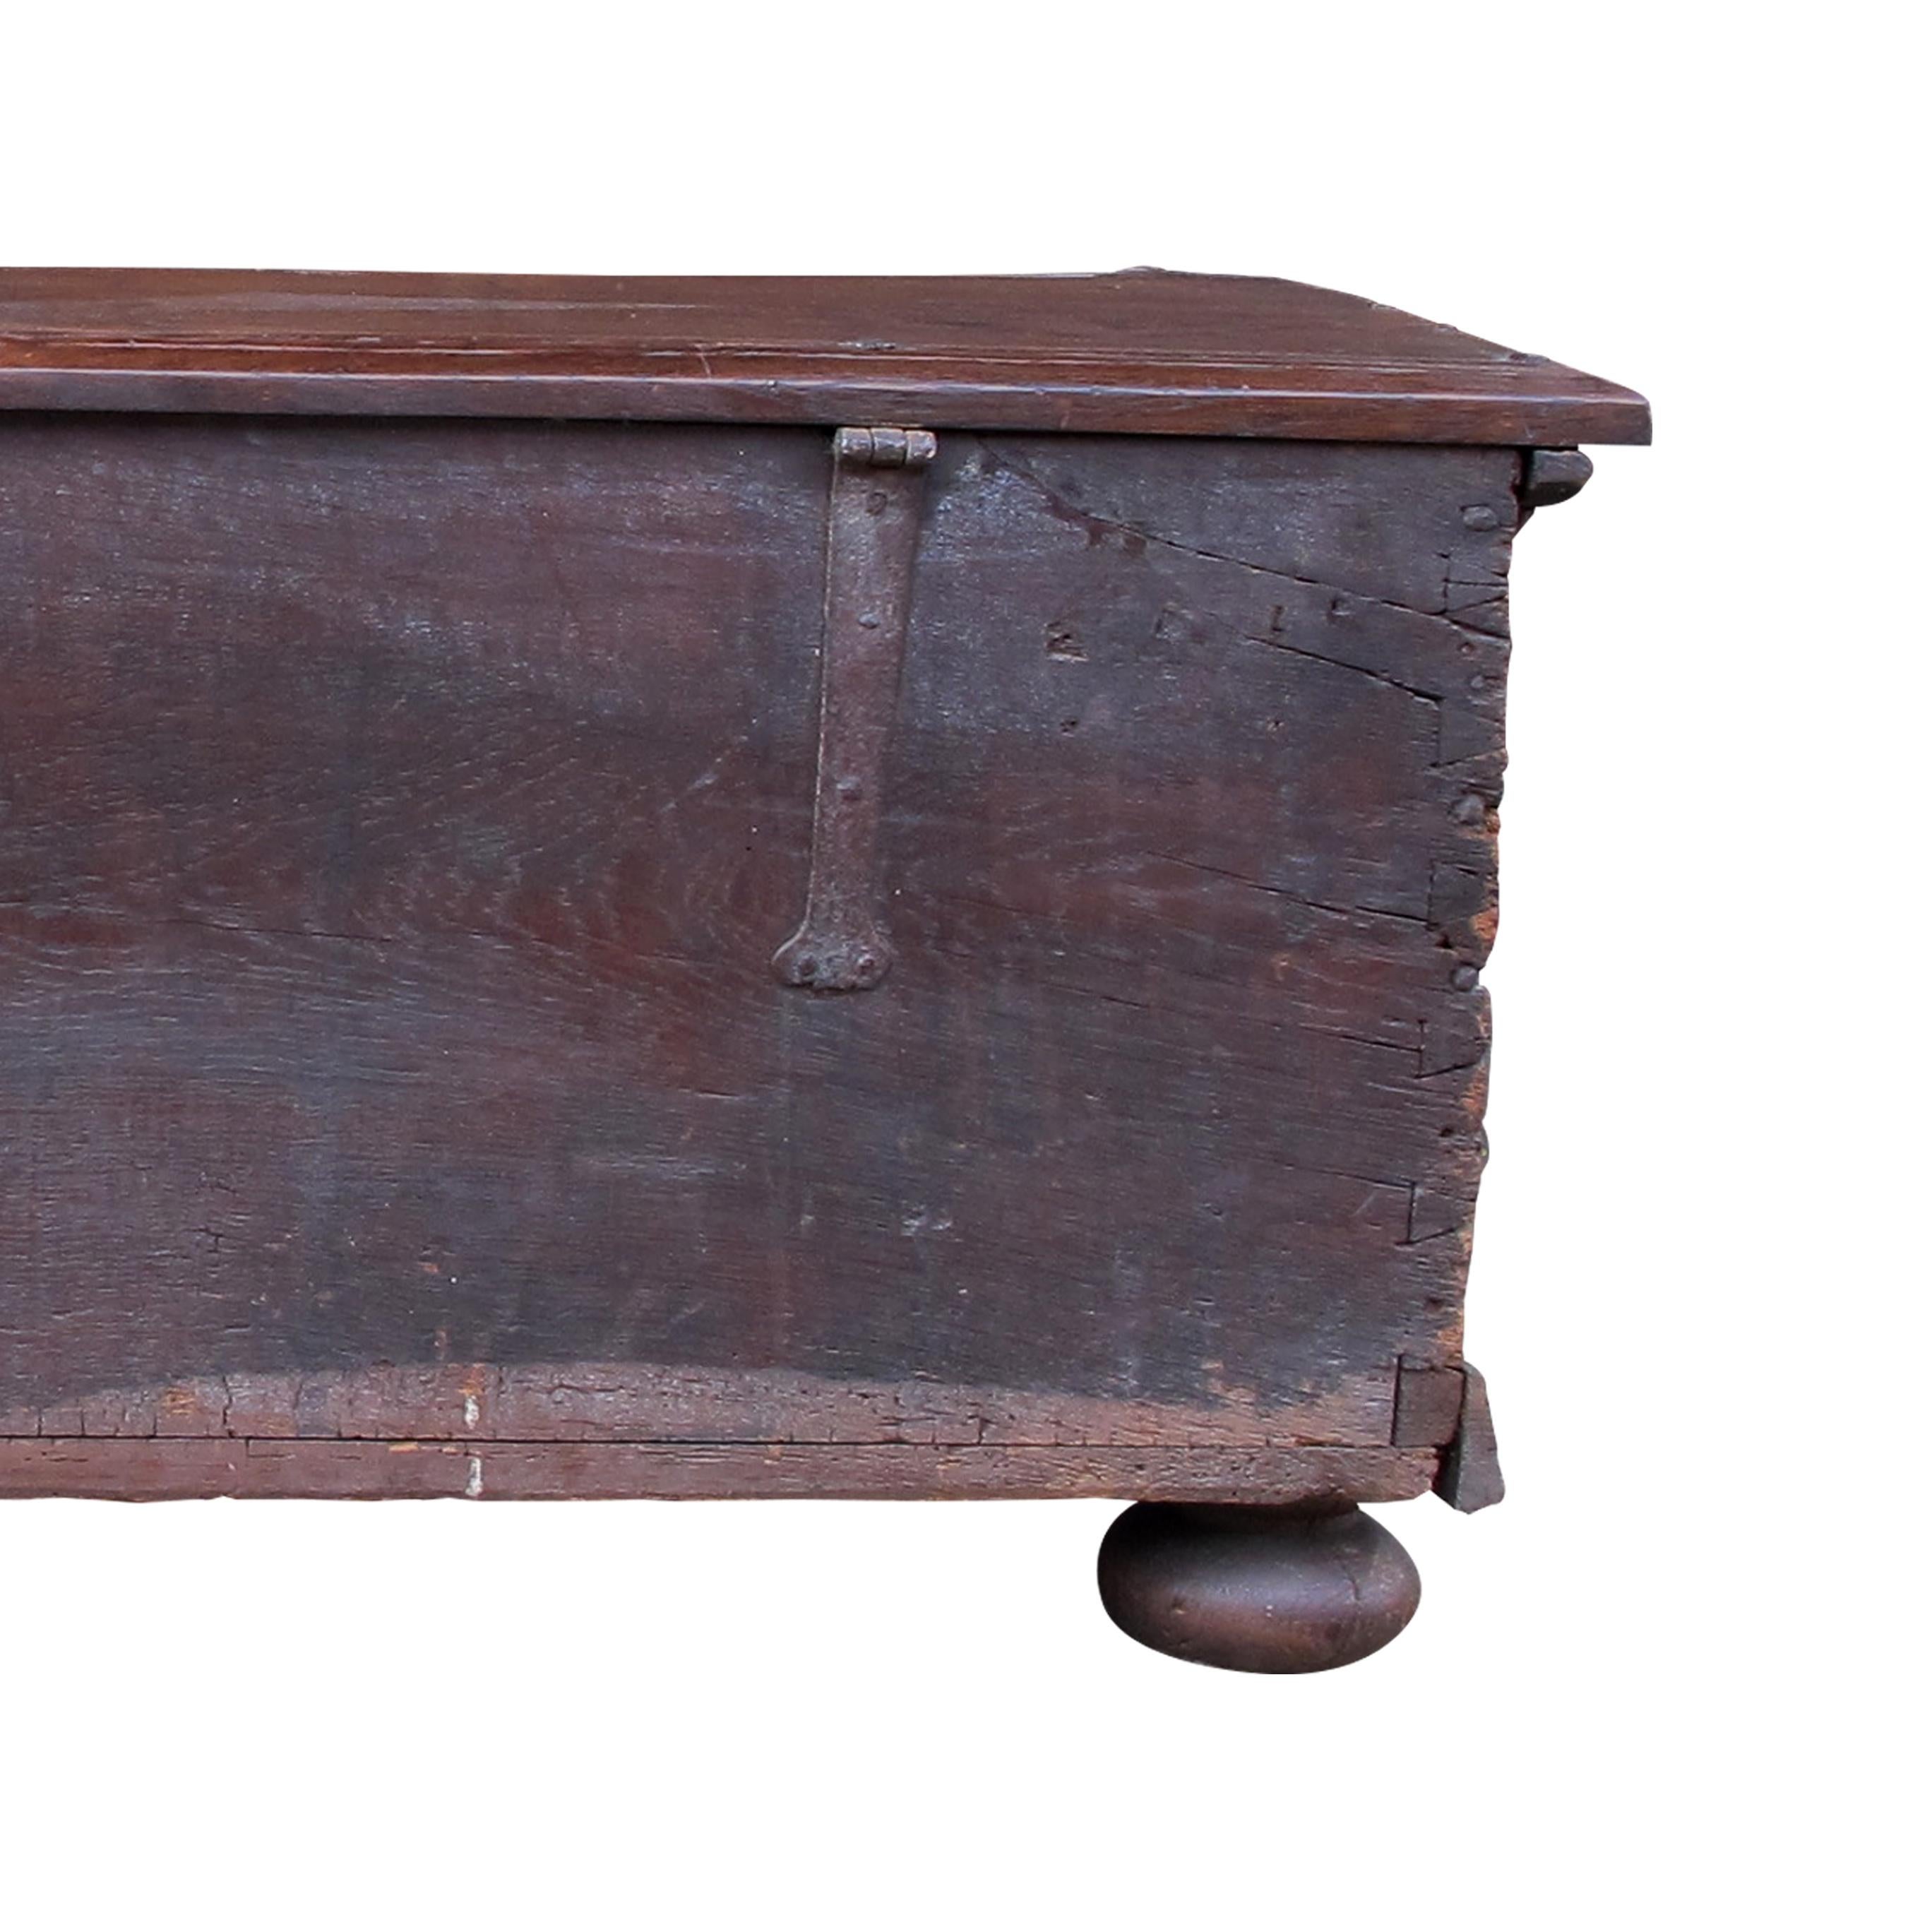 Early 18th Century Large Marriage Oak Trunk With a Vaulted Lid and Carvings For Sale 7